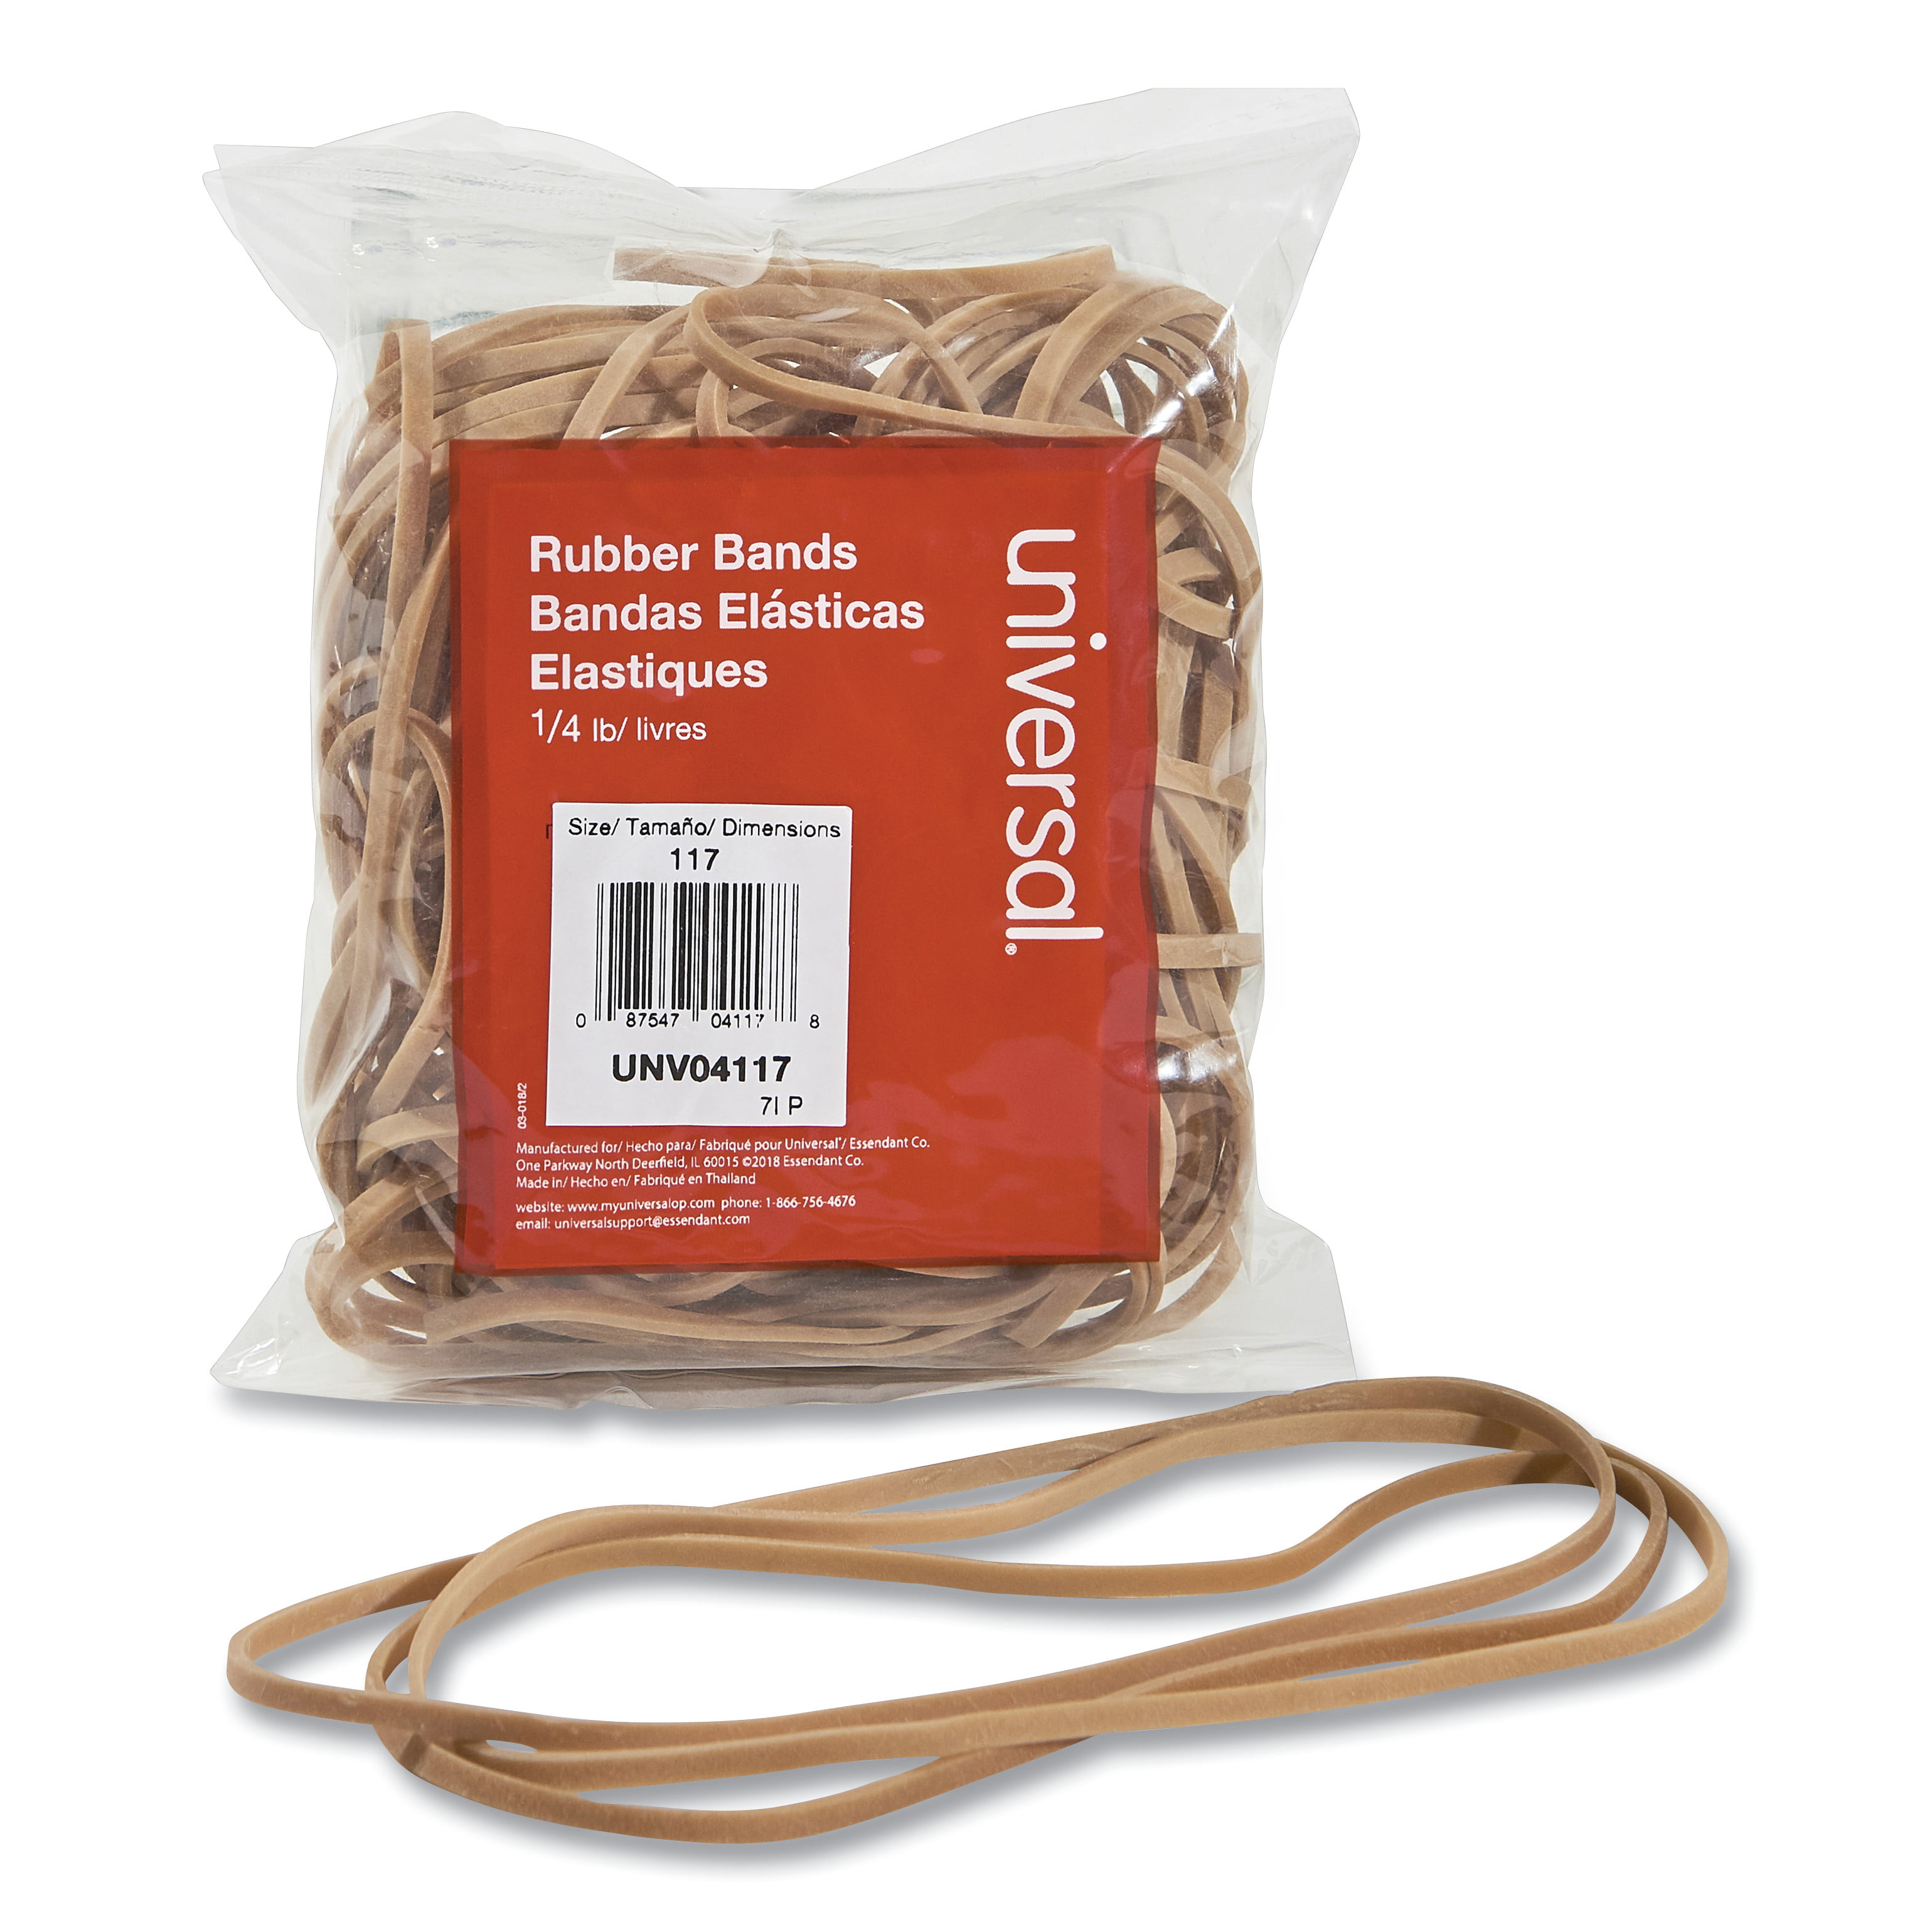 Rubber Bands, Size 117, 7 x 1 Size 117, 7 X 1/8, 210 Bands/1Lb Pack Rubber...